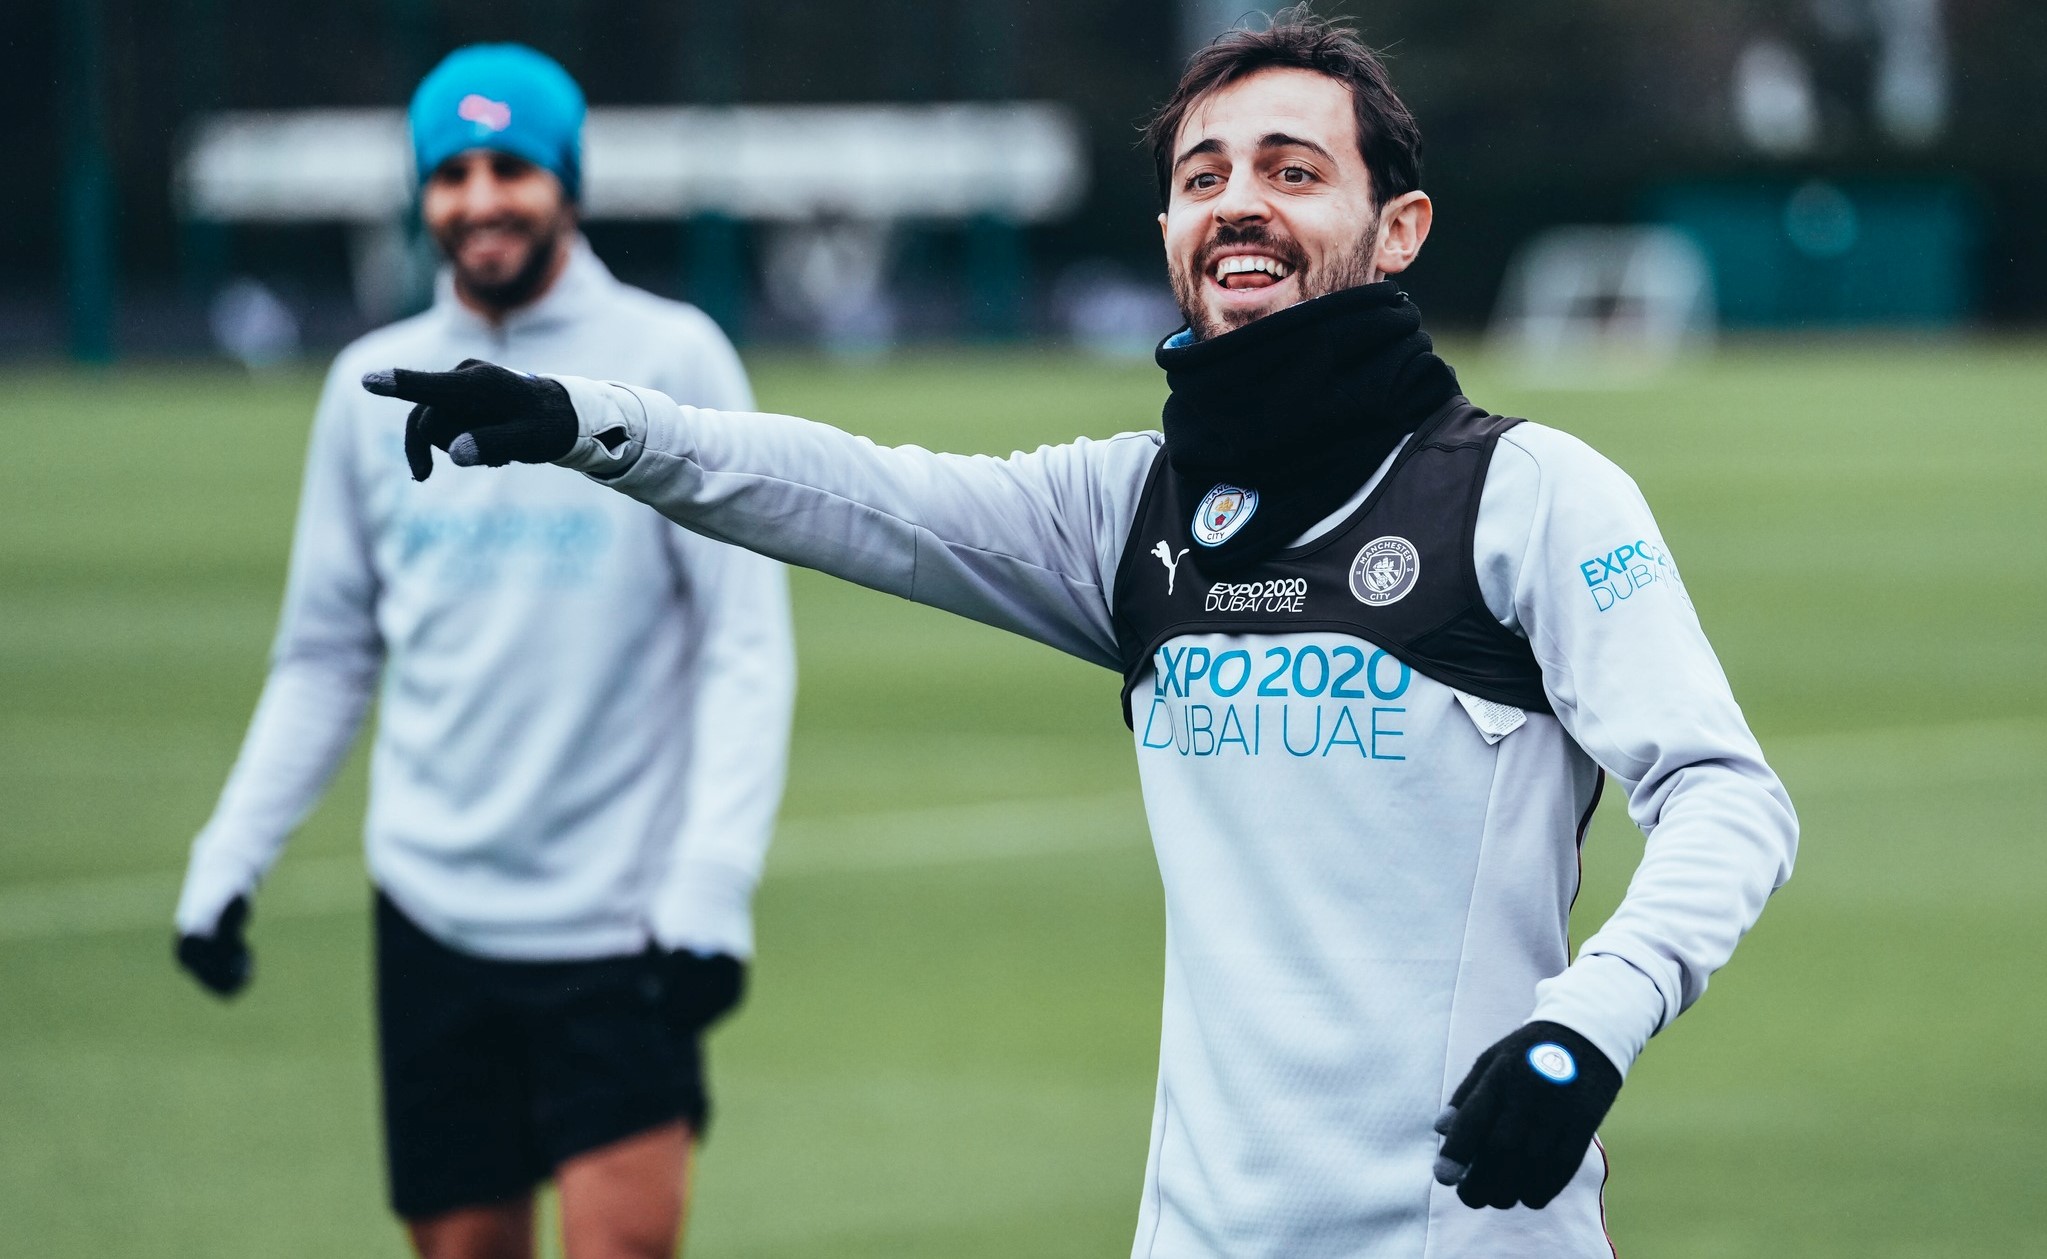 Bernardo Silva: Some managers are good with people, not tactically, others are opposite, Pep has it both